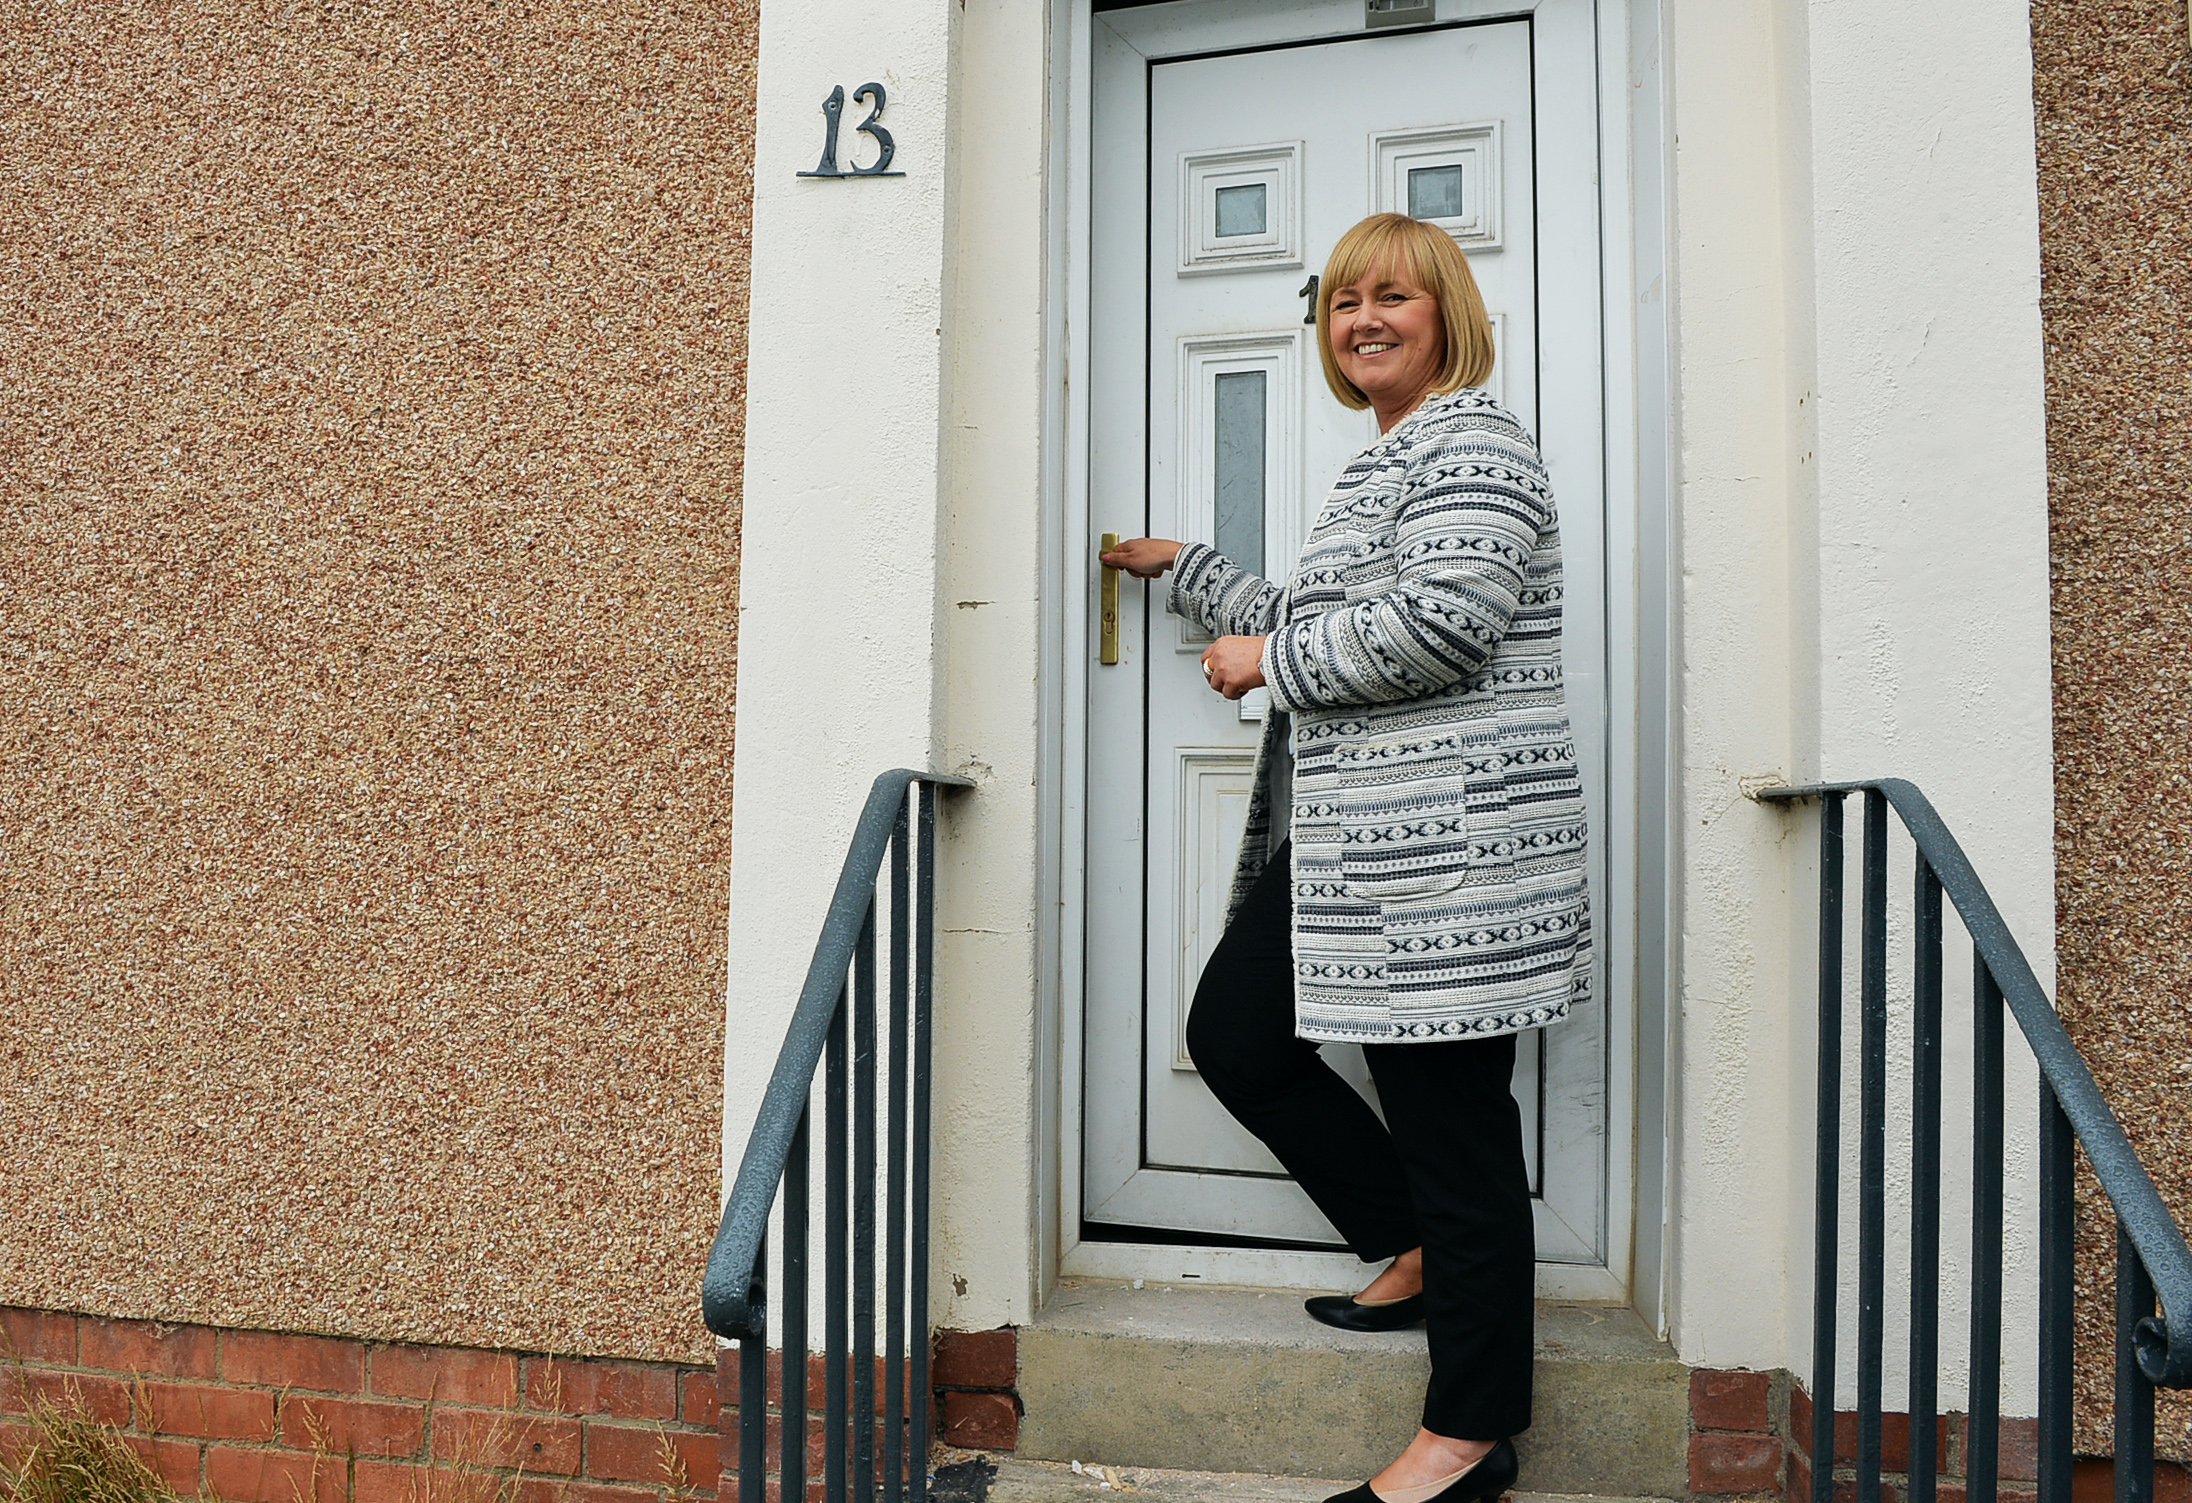 North Lanarkshire Council purchase scheme adds more homes to offering